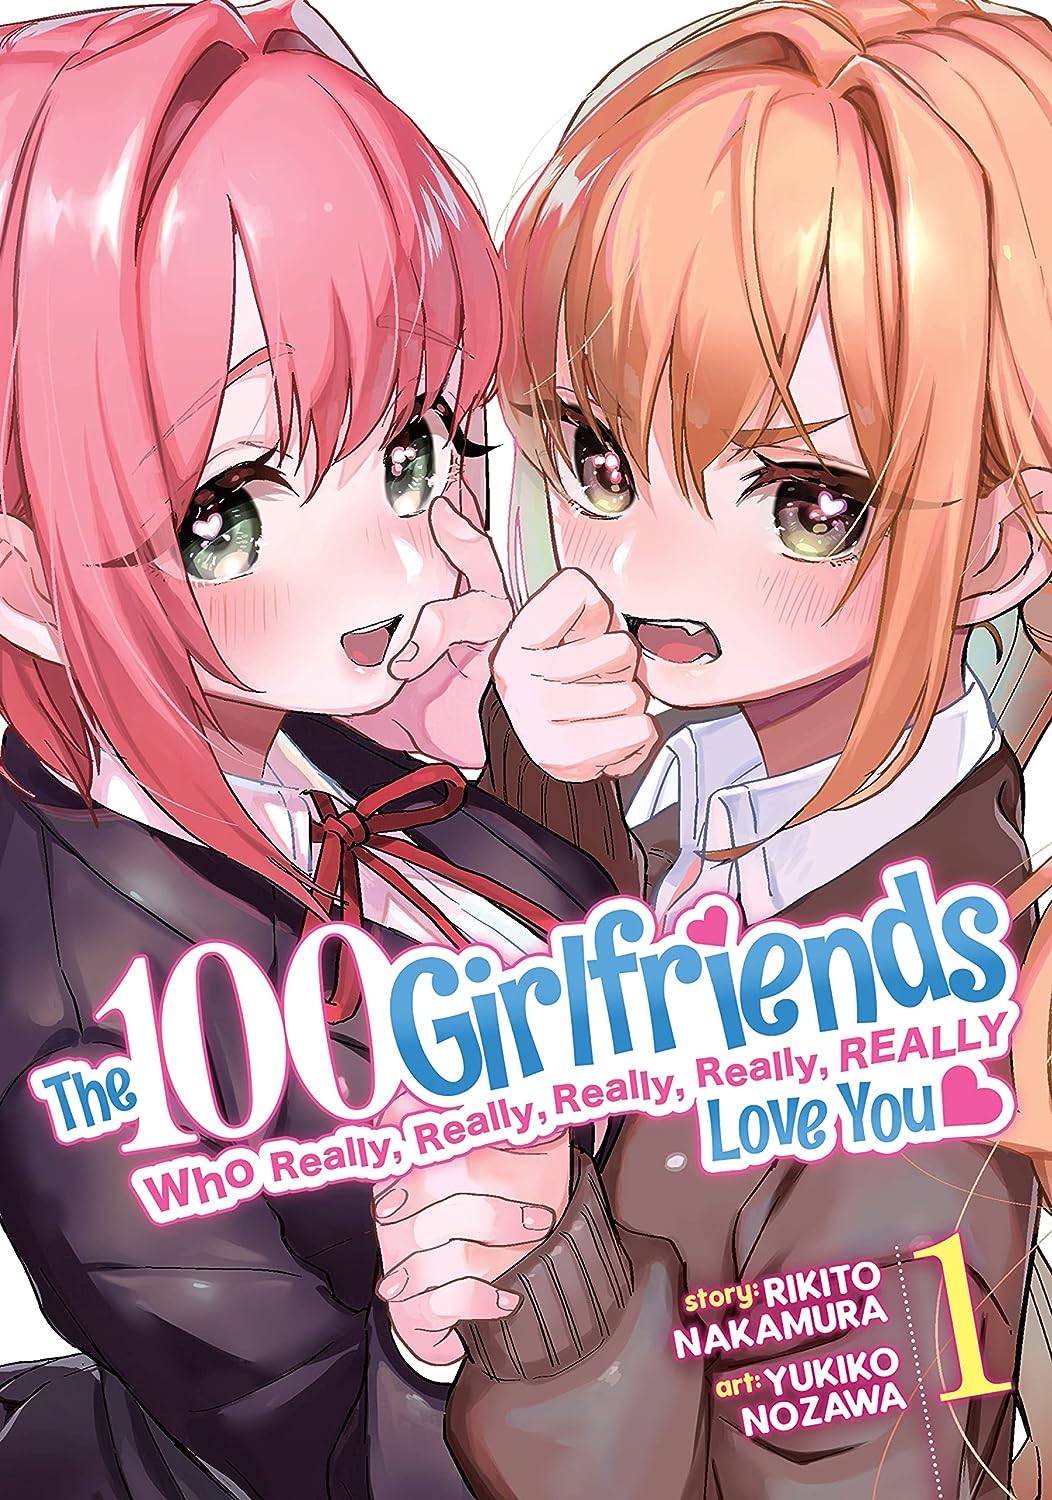 The 100 Girlfriends Who Really, Really, Really, Really, Really Love You Vol. 1